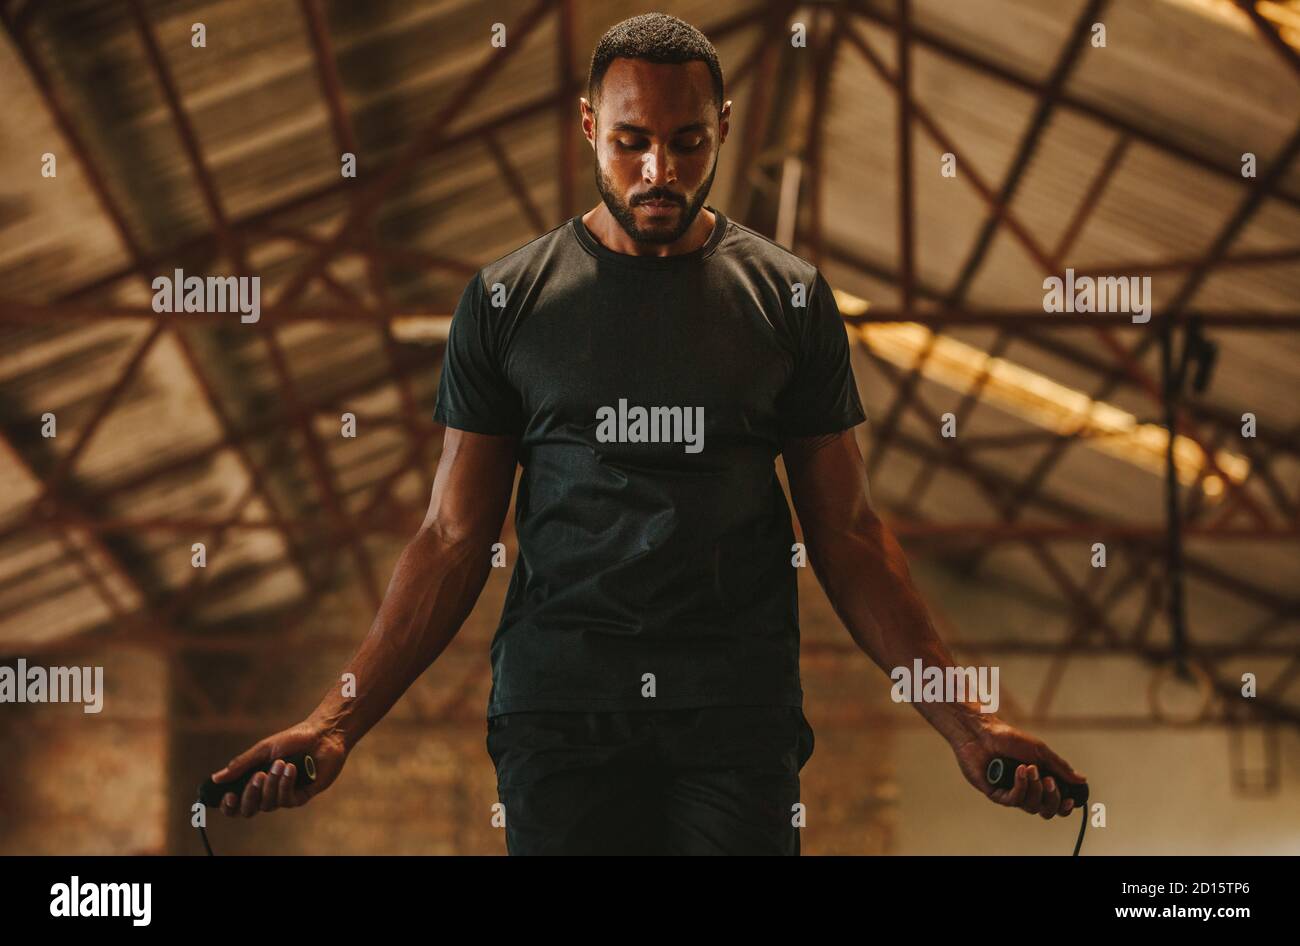 Fitness man with jumping rope in gym at old warehouse. Male exercising with skipping rope at cross workout space. Stock Photo